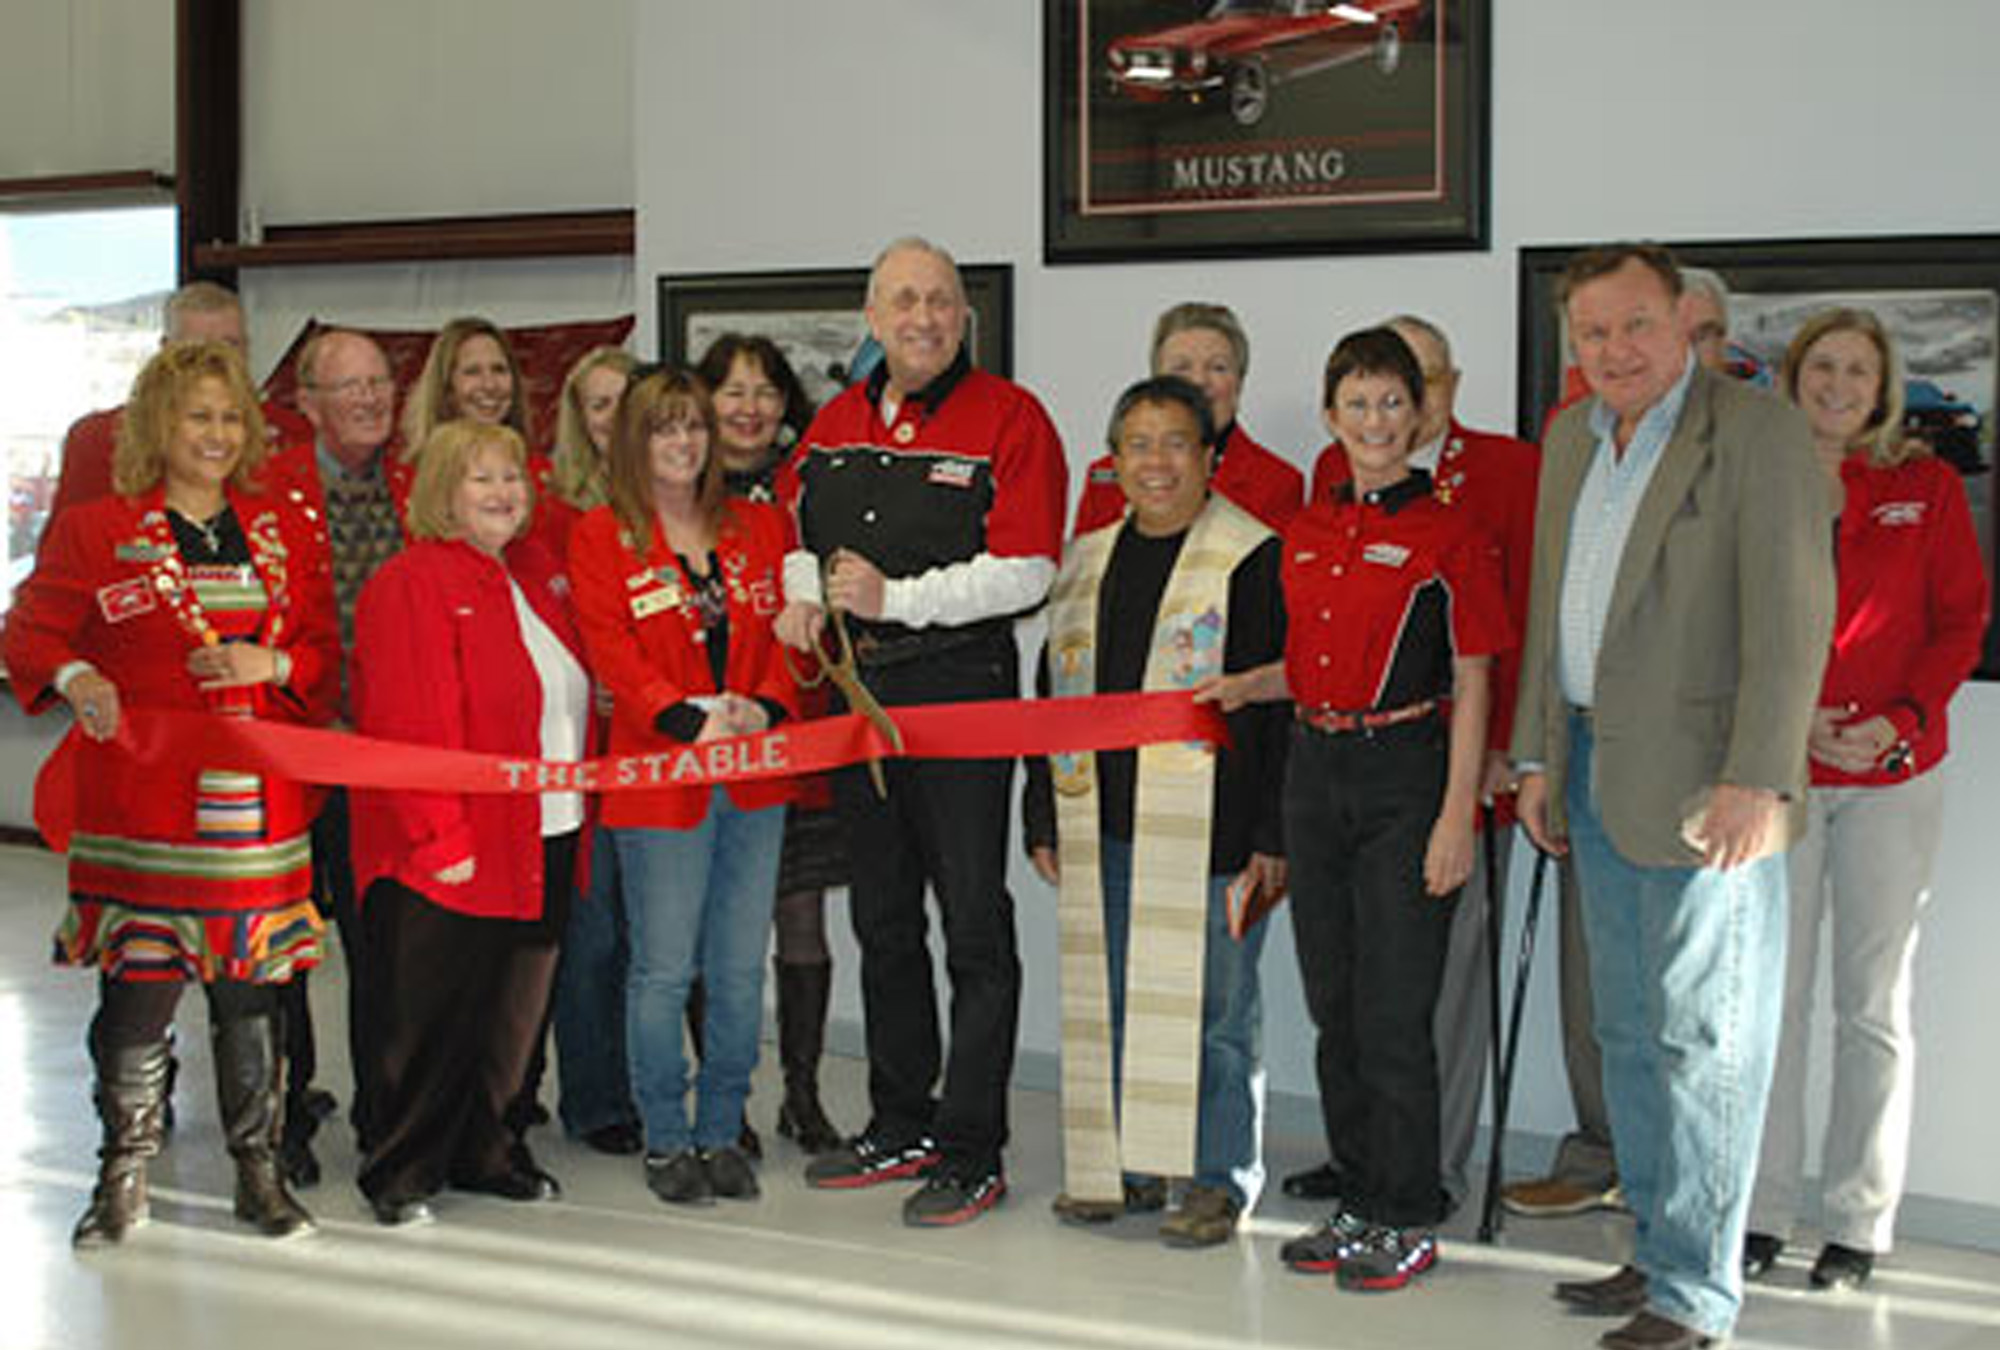 Ribbon Cutting ceremony at The Stable Performance Cars in Alpine Texas